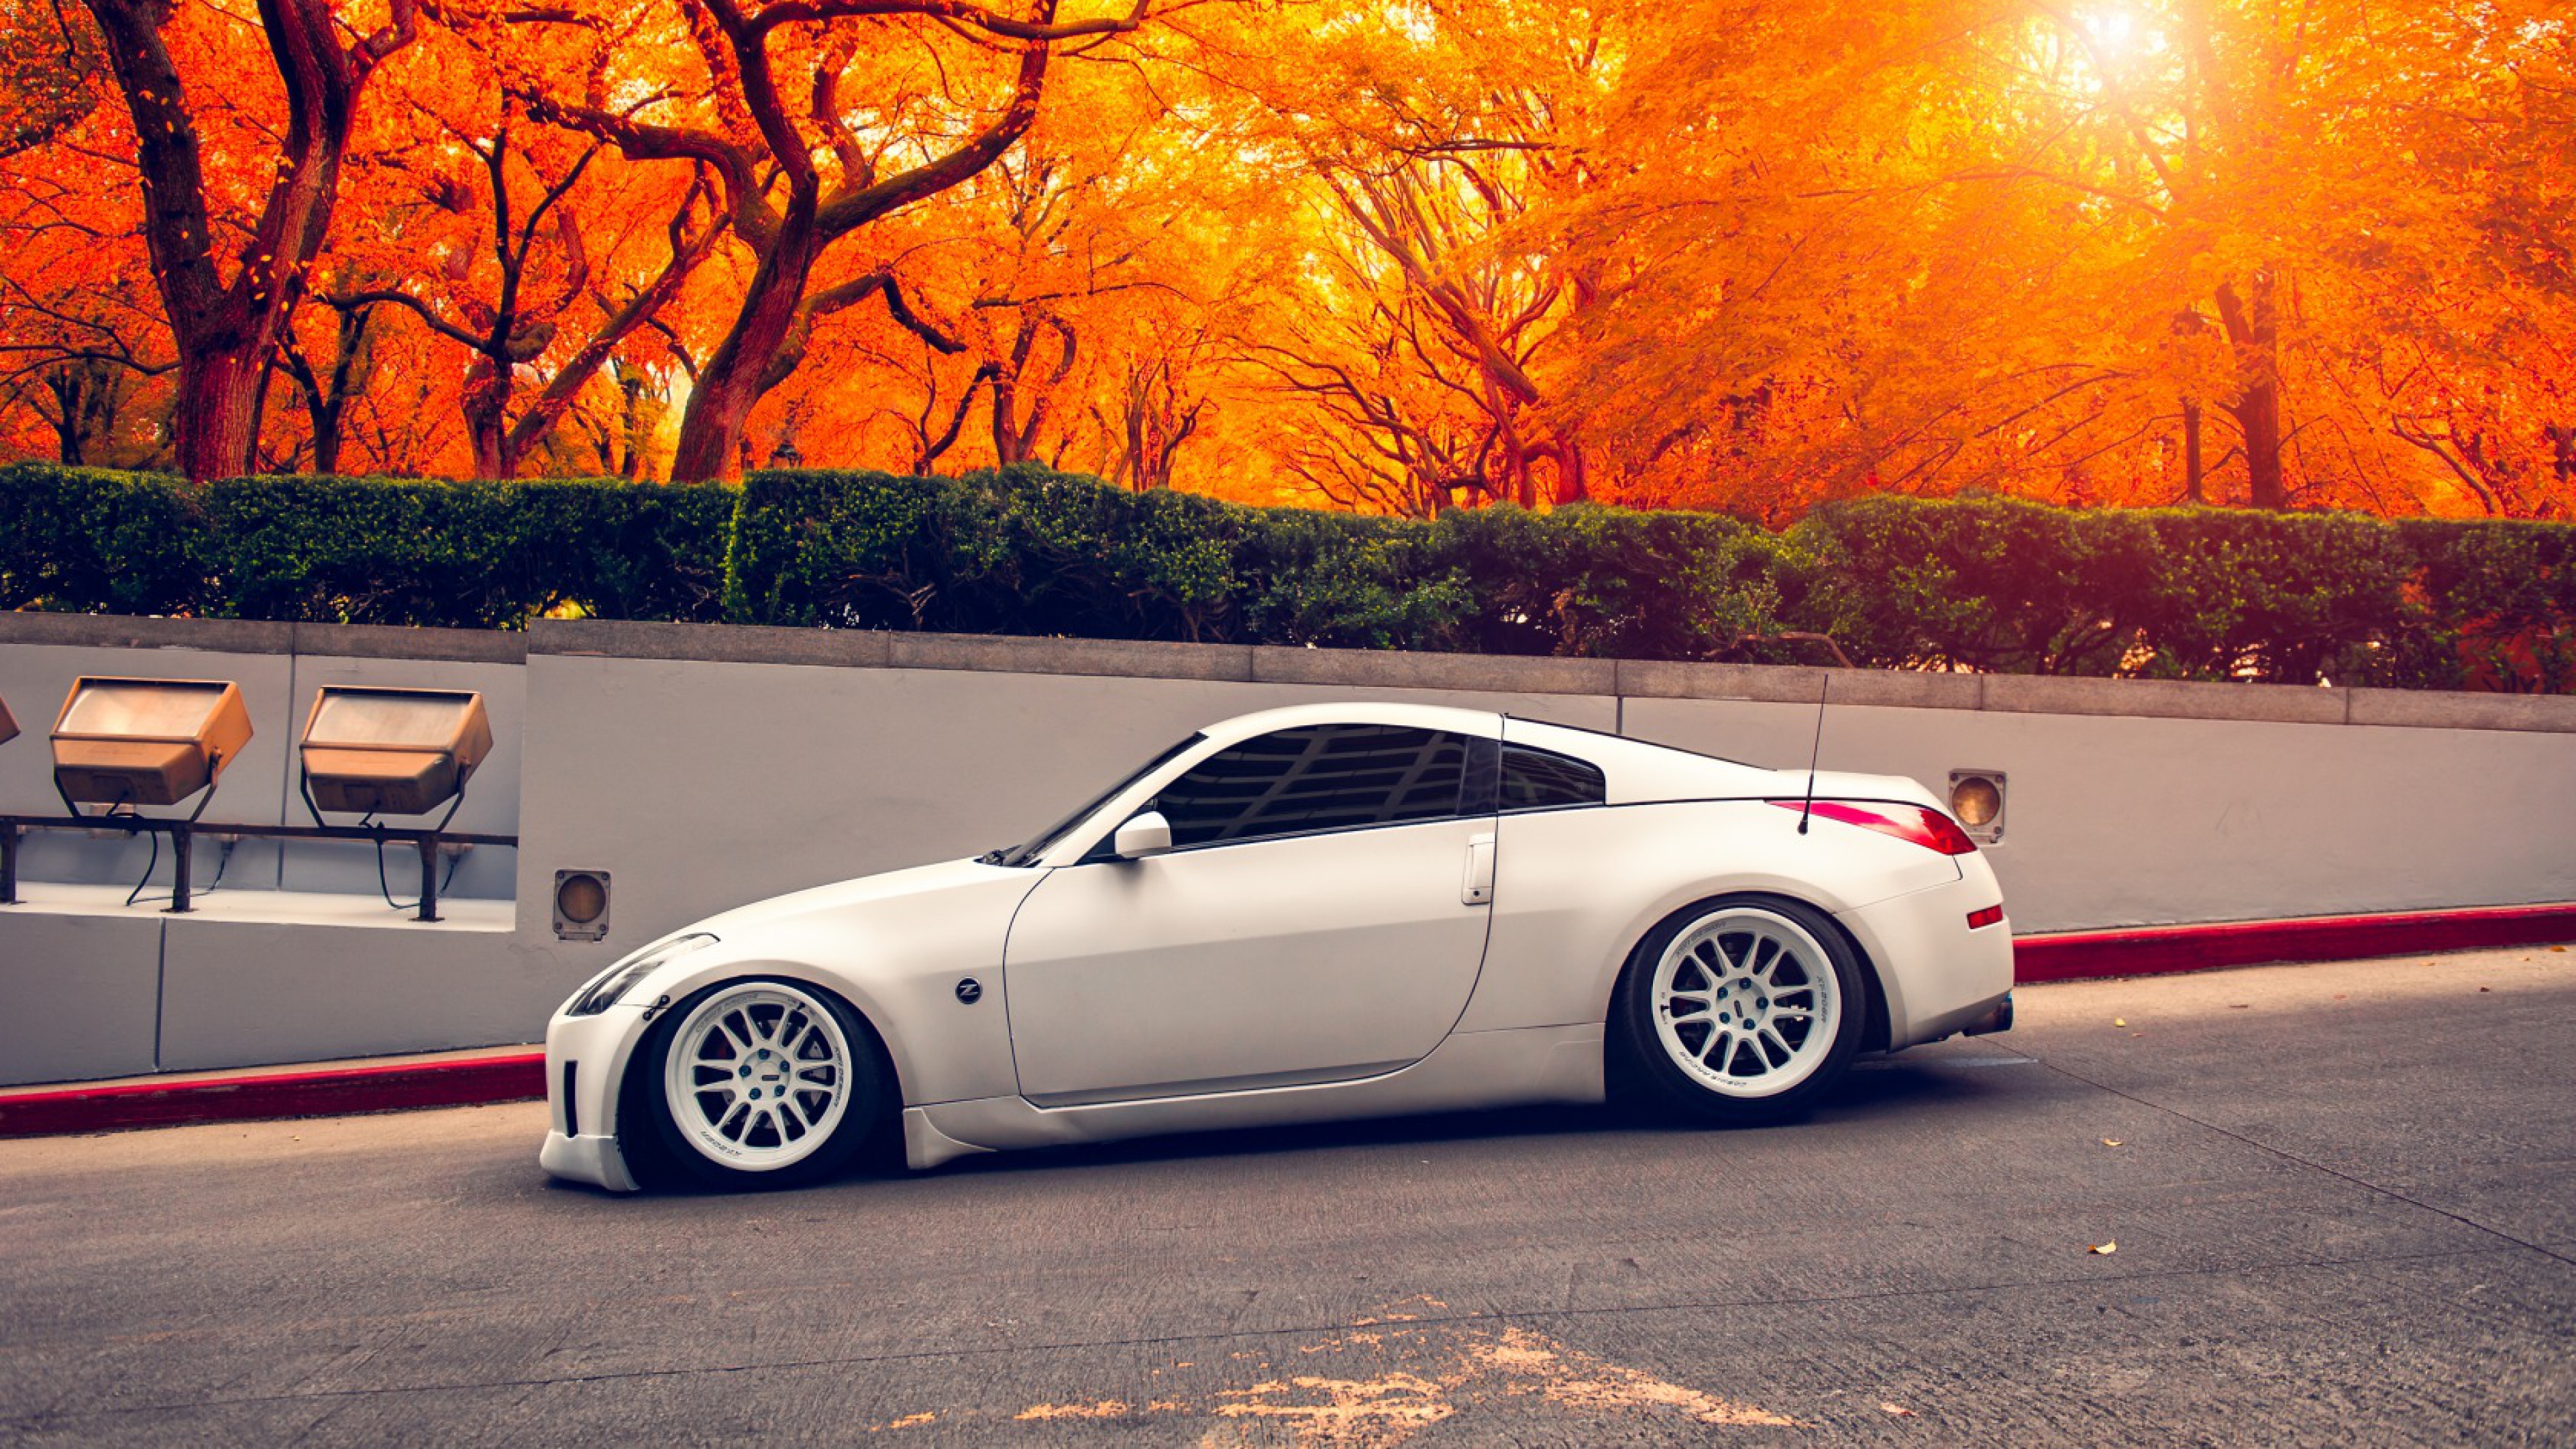 Nissan z autumn hd cars k wallpapers images backgrounds photos and pictures